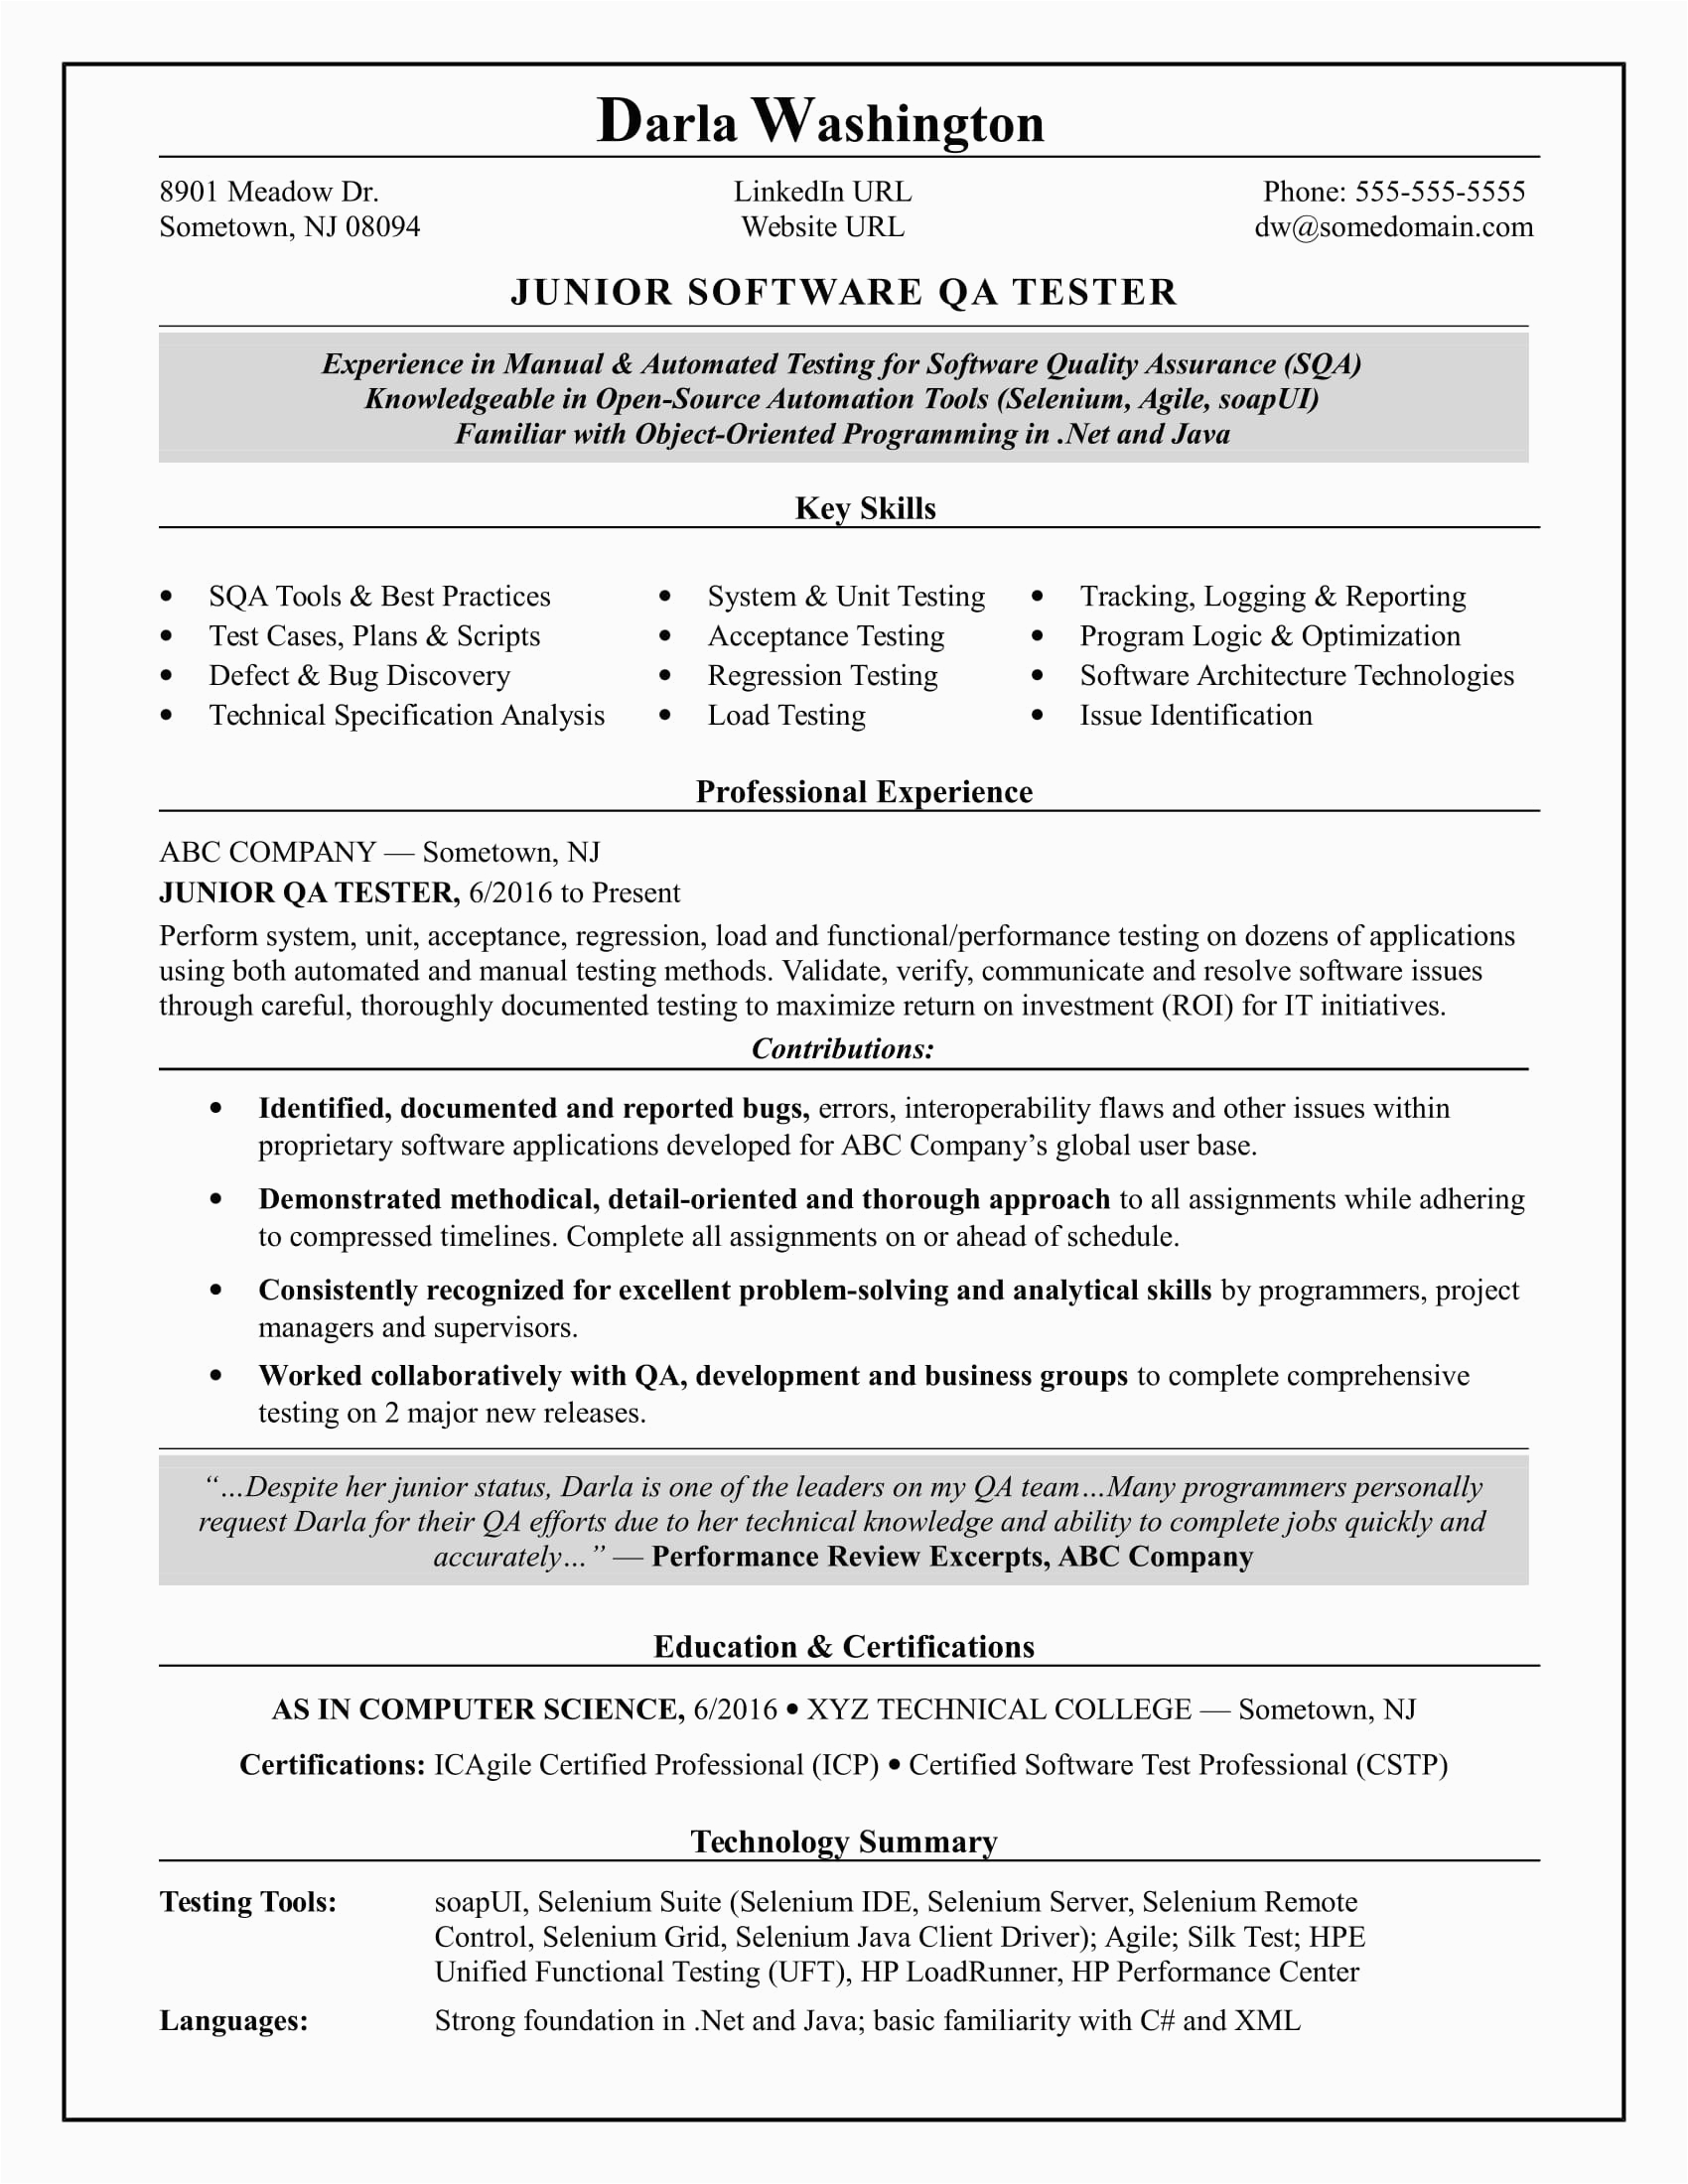 Experienced Qa software Tester Resume Sample Entry Level Qa software Tester Resume Sample